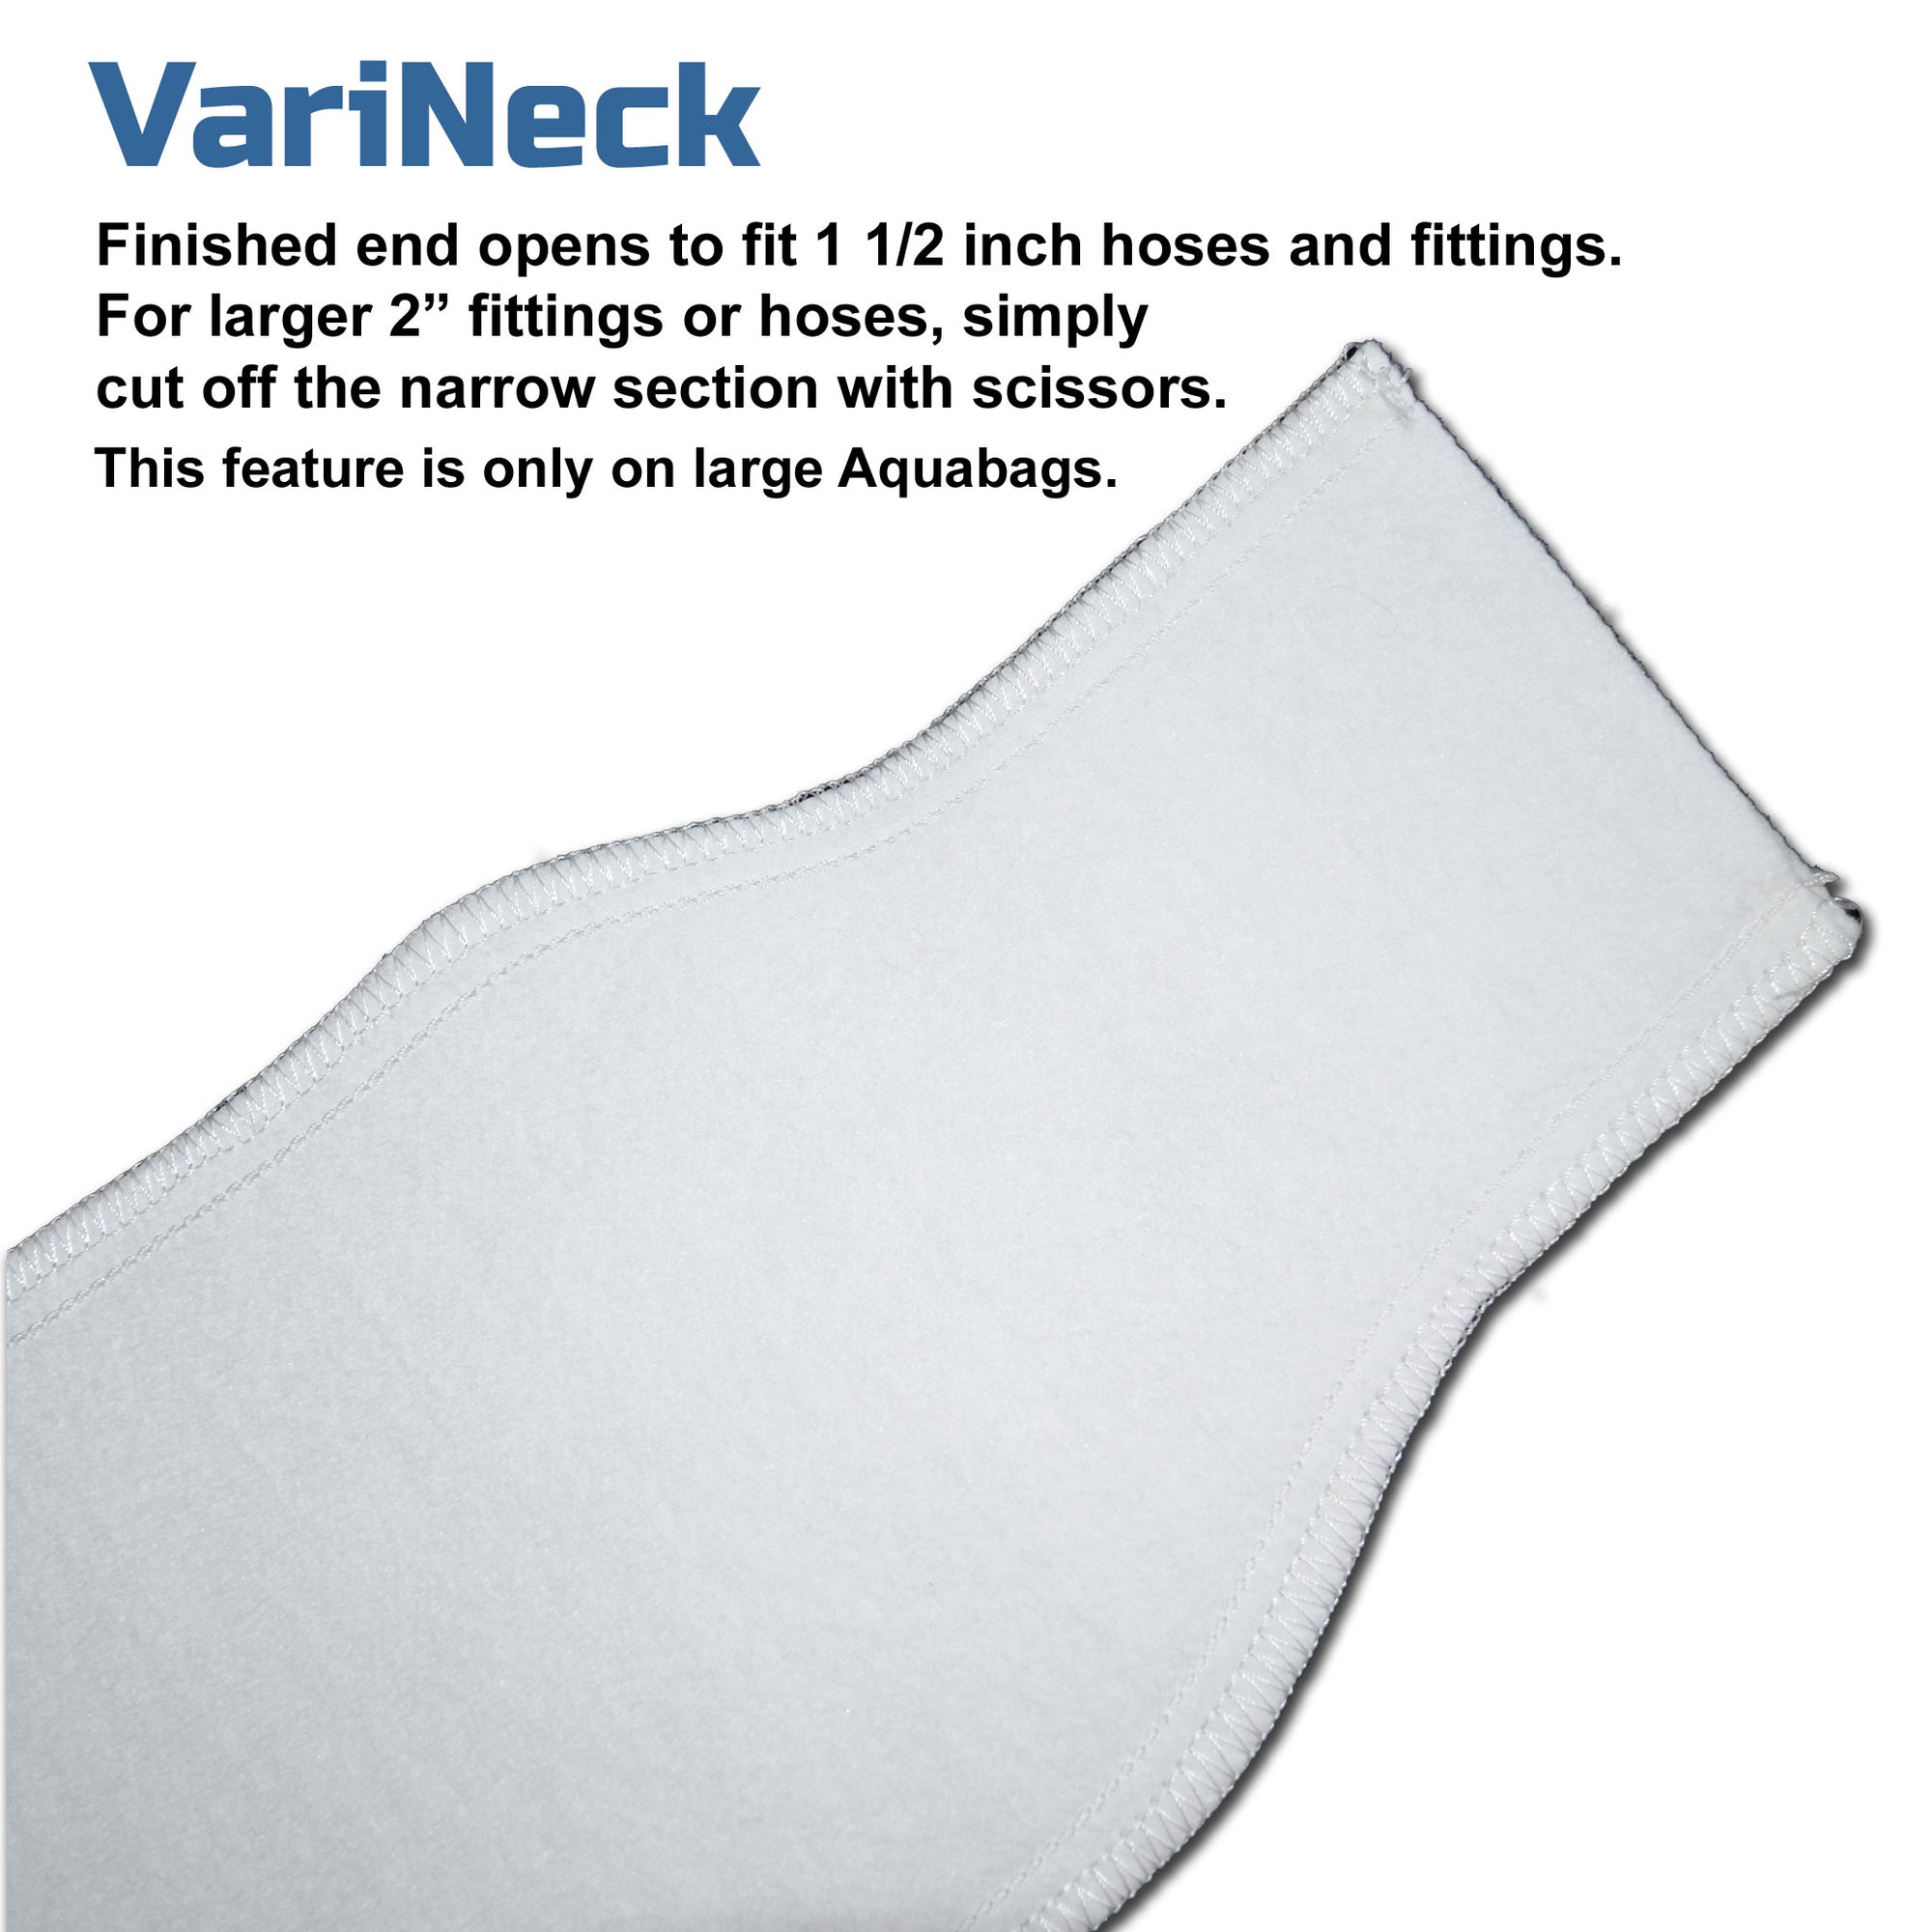 Varineck allows connection to 1 1/2 inch and 2 inch fittings and pool hoses.